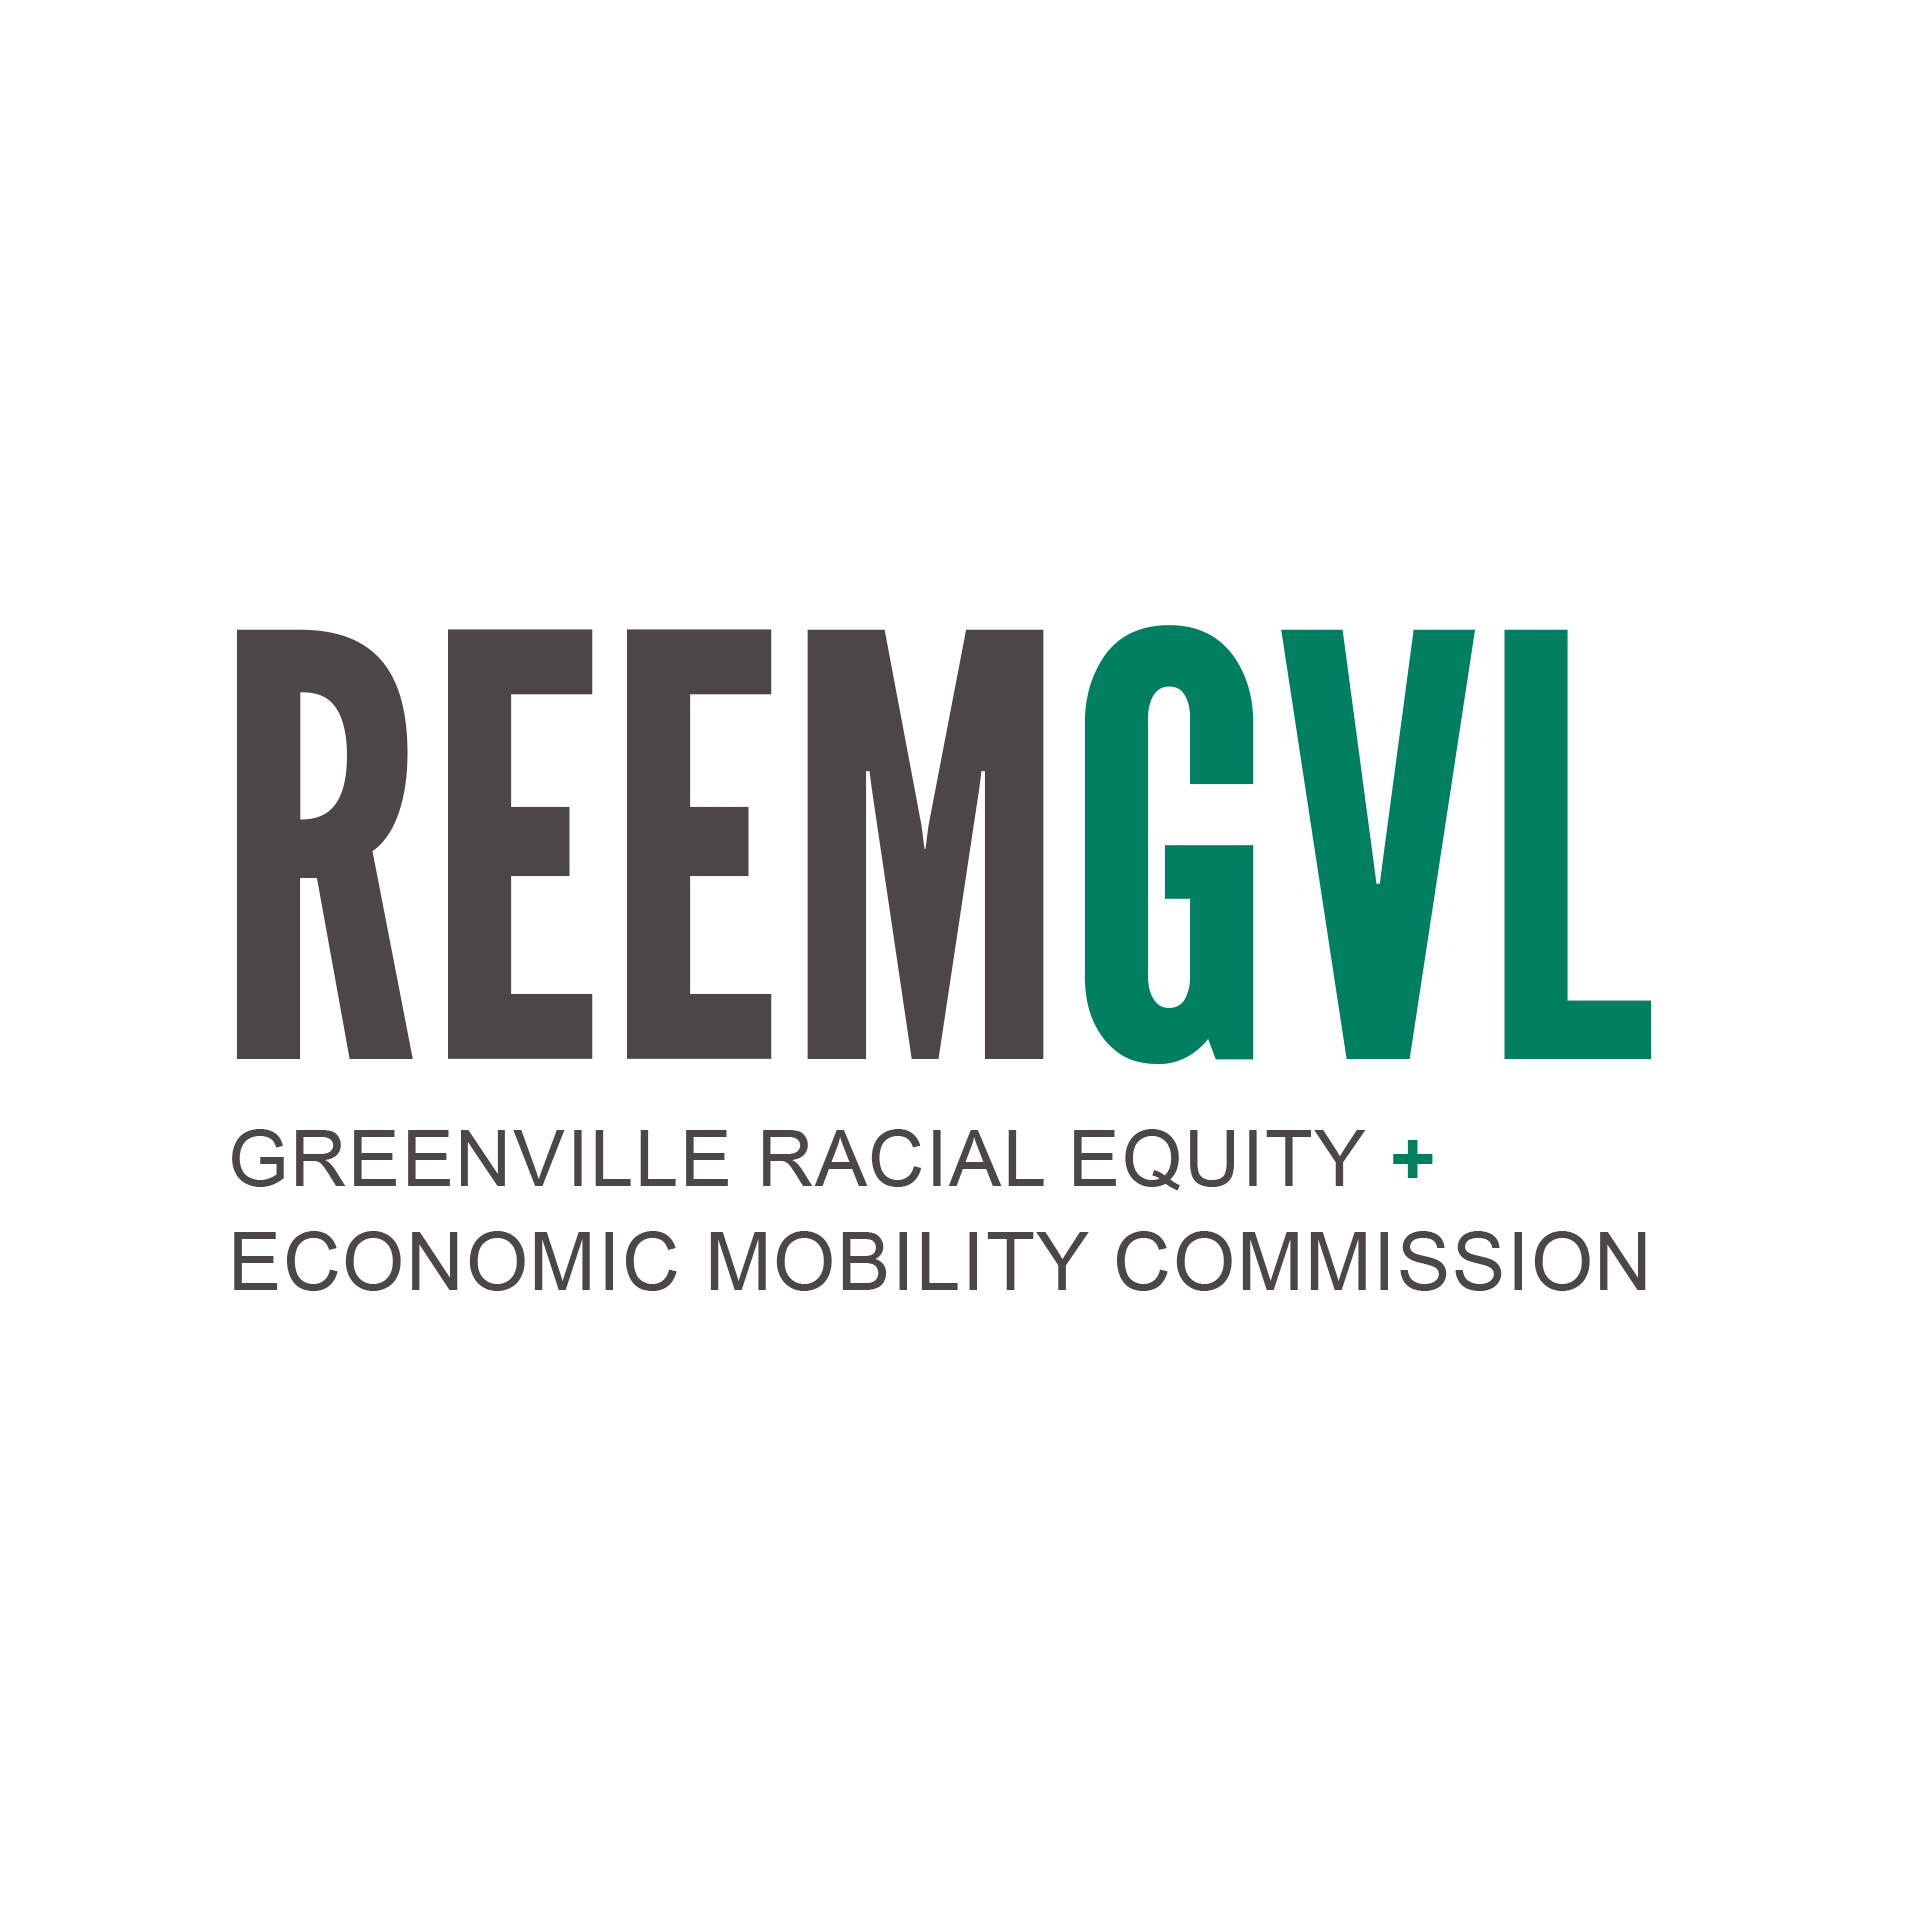 Greenville Racial Equity and Economic Mobility Commission launches, commits to meaningful change